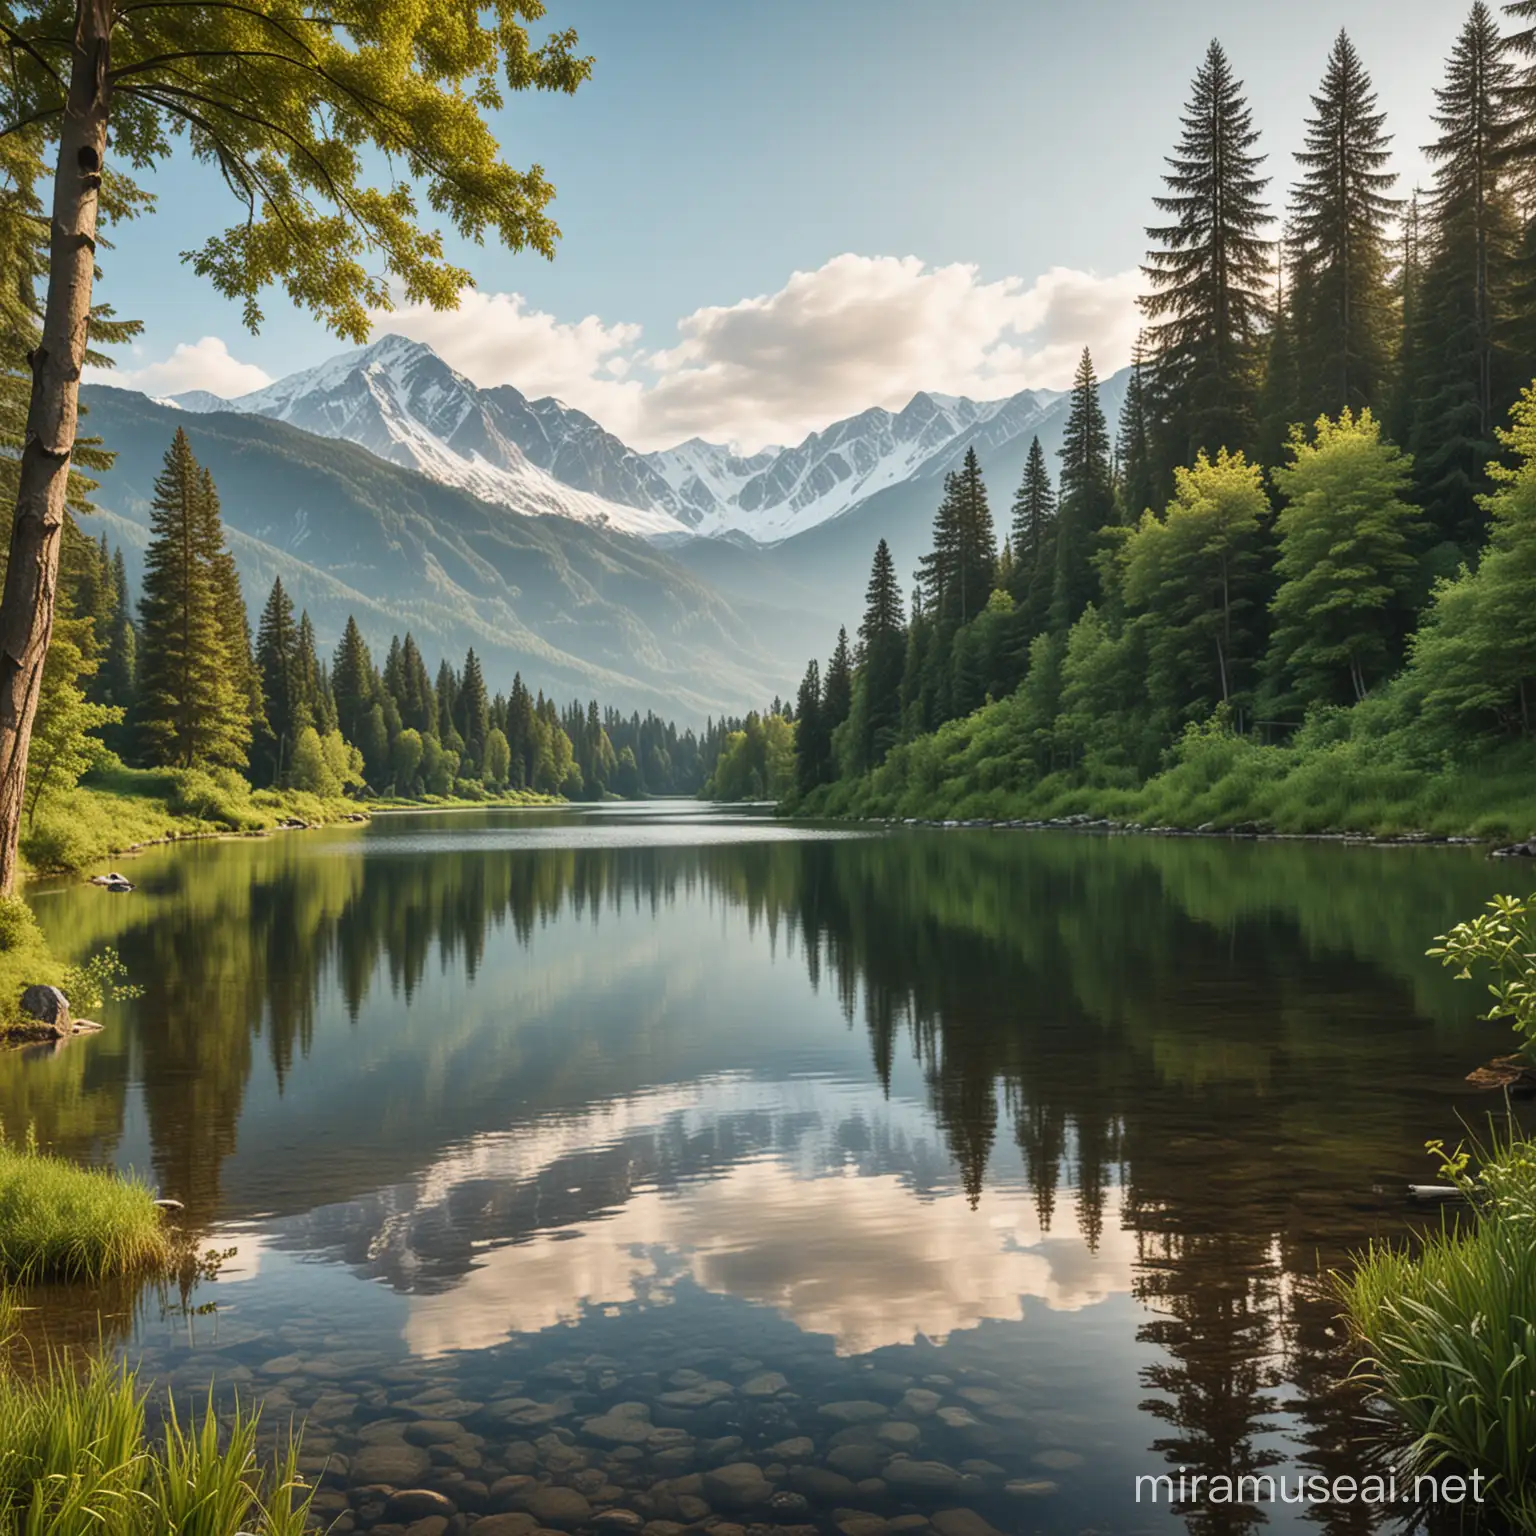 Tranquil Lake Surrounded by Lush Greenery and SnowCapped Mountains